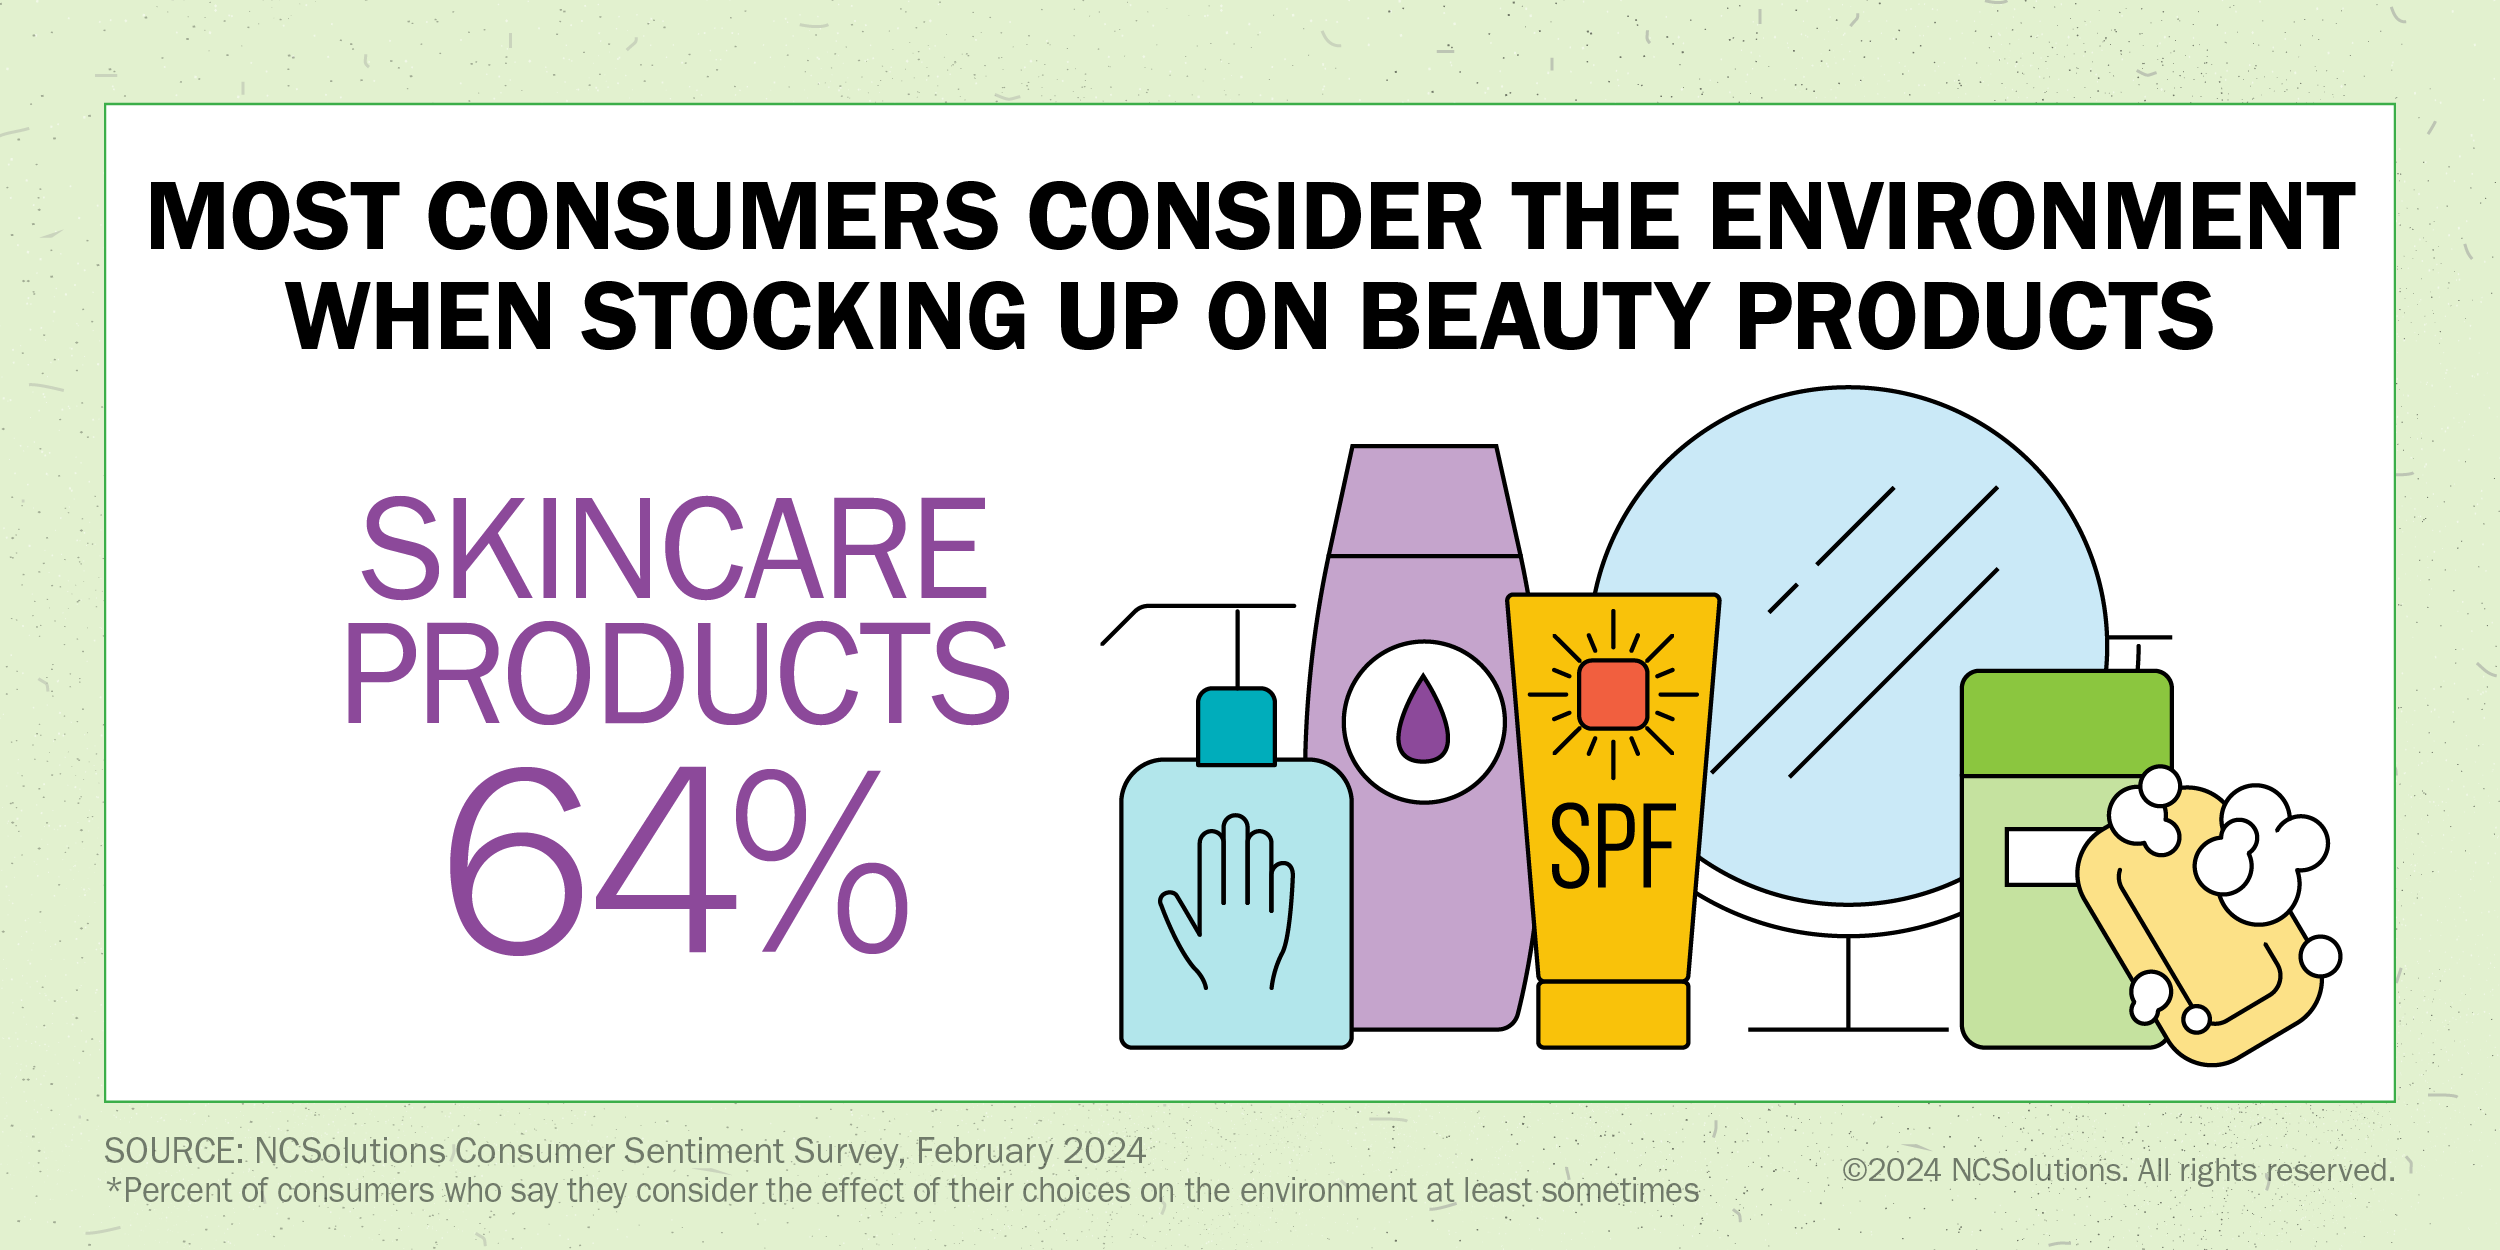 64% of consumers consider the environment when stocking up on beauty products. 